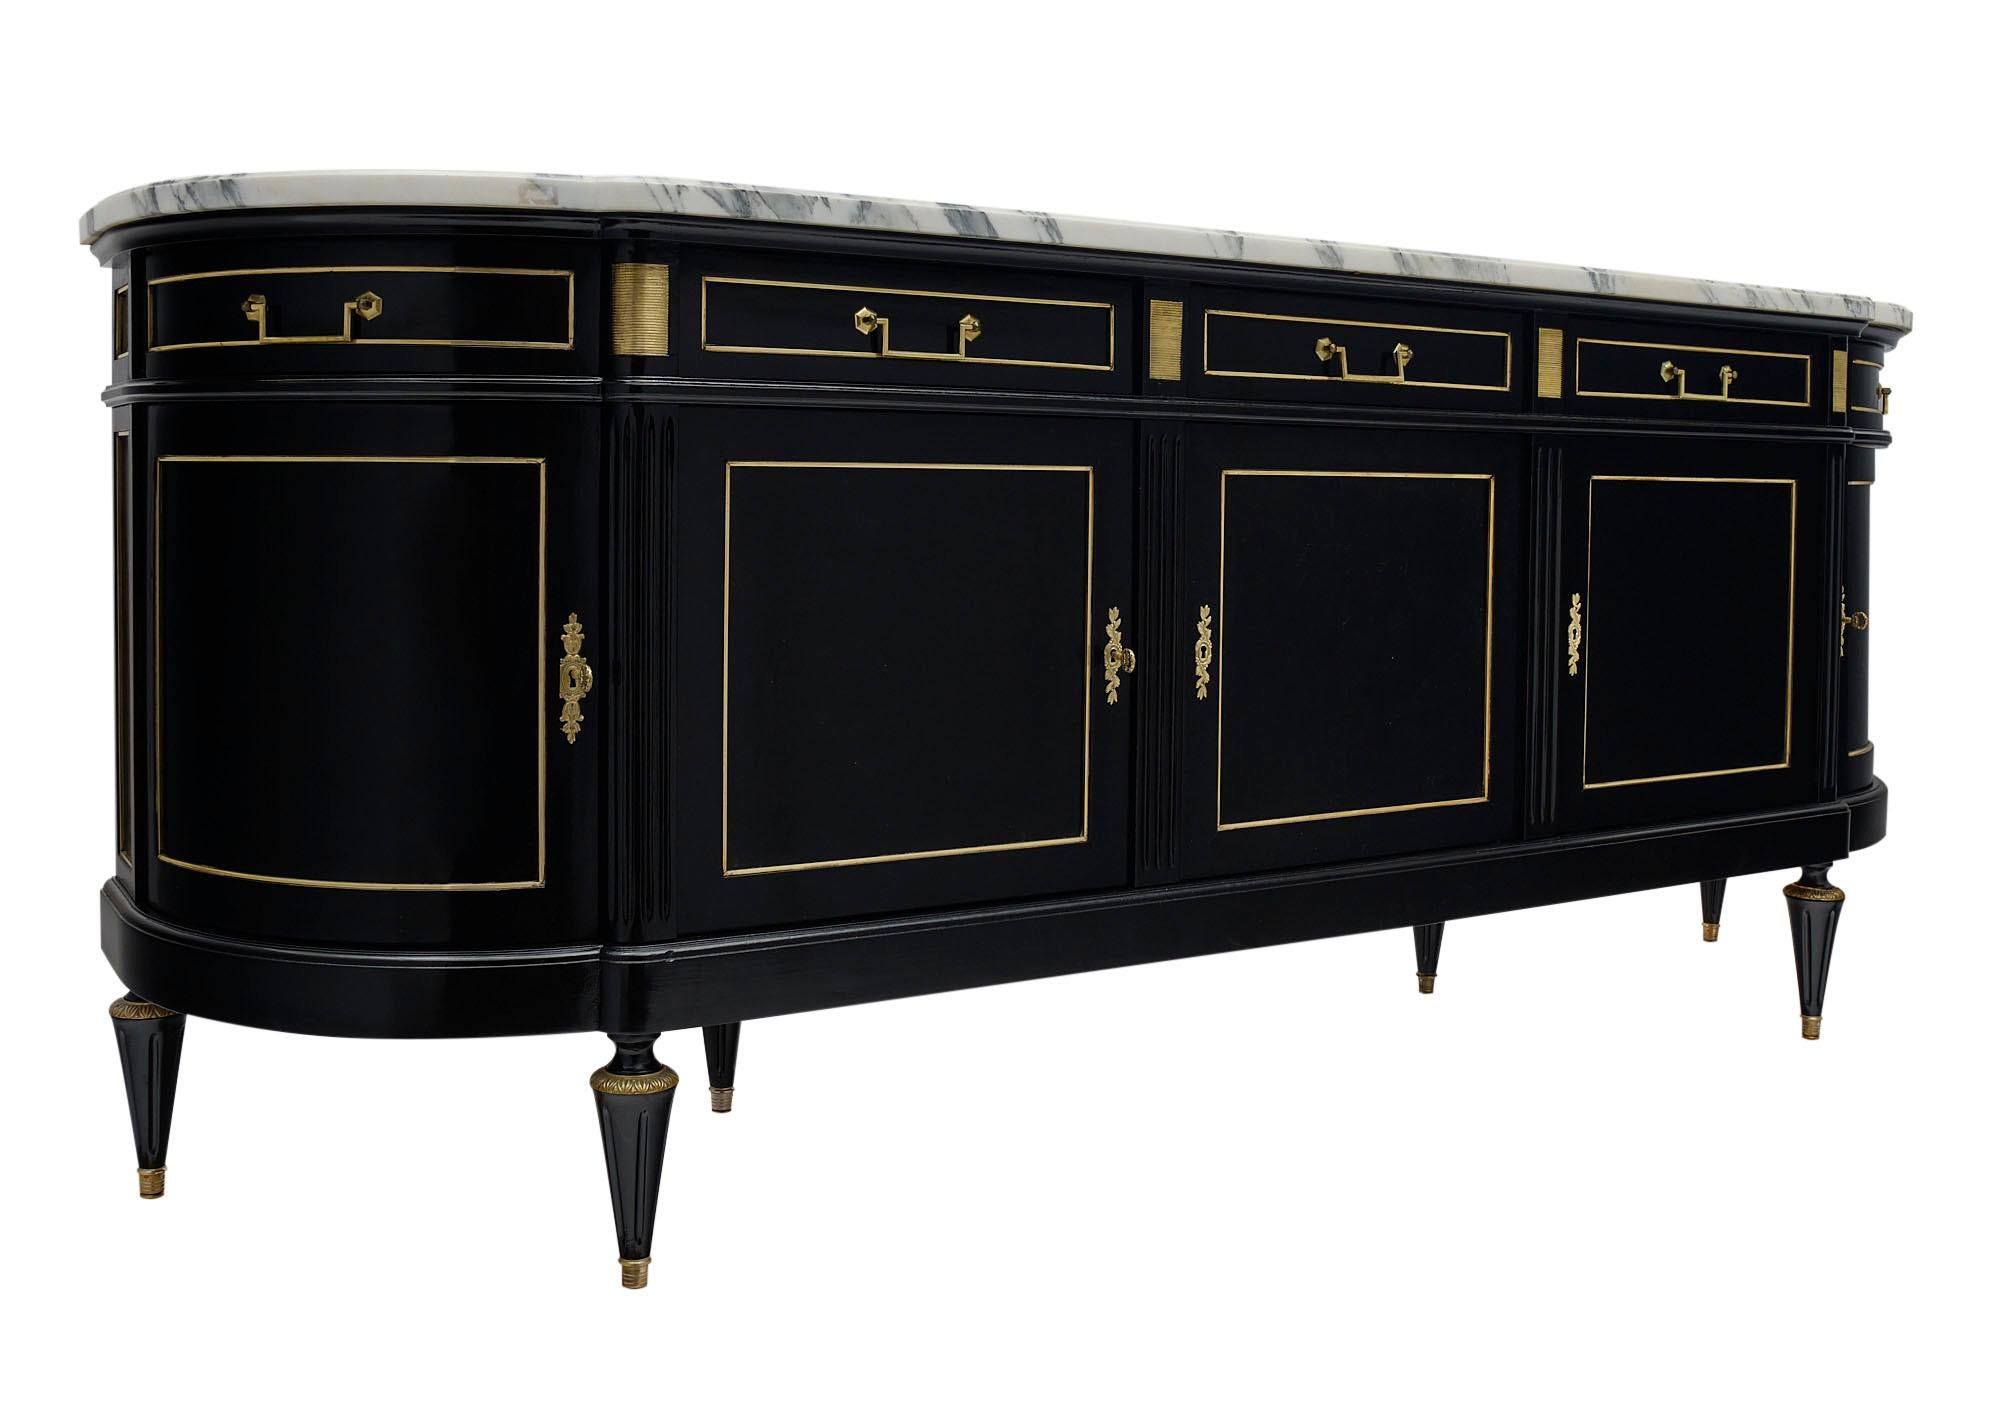 Buffet or enfilade made of mahogany from France in the Louis XVI style. There are five dovetailed drawers above five doors opening to adjustable shelving. This stately sideboard features a lustrous Museum-quality French polish, gilt brass trims and